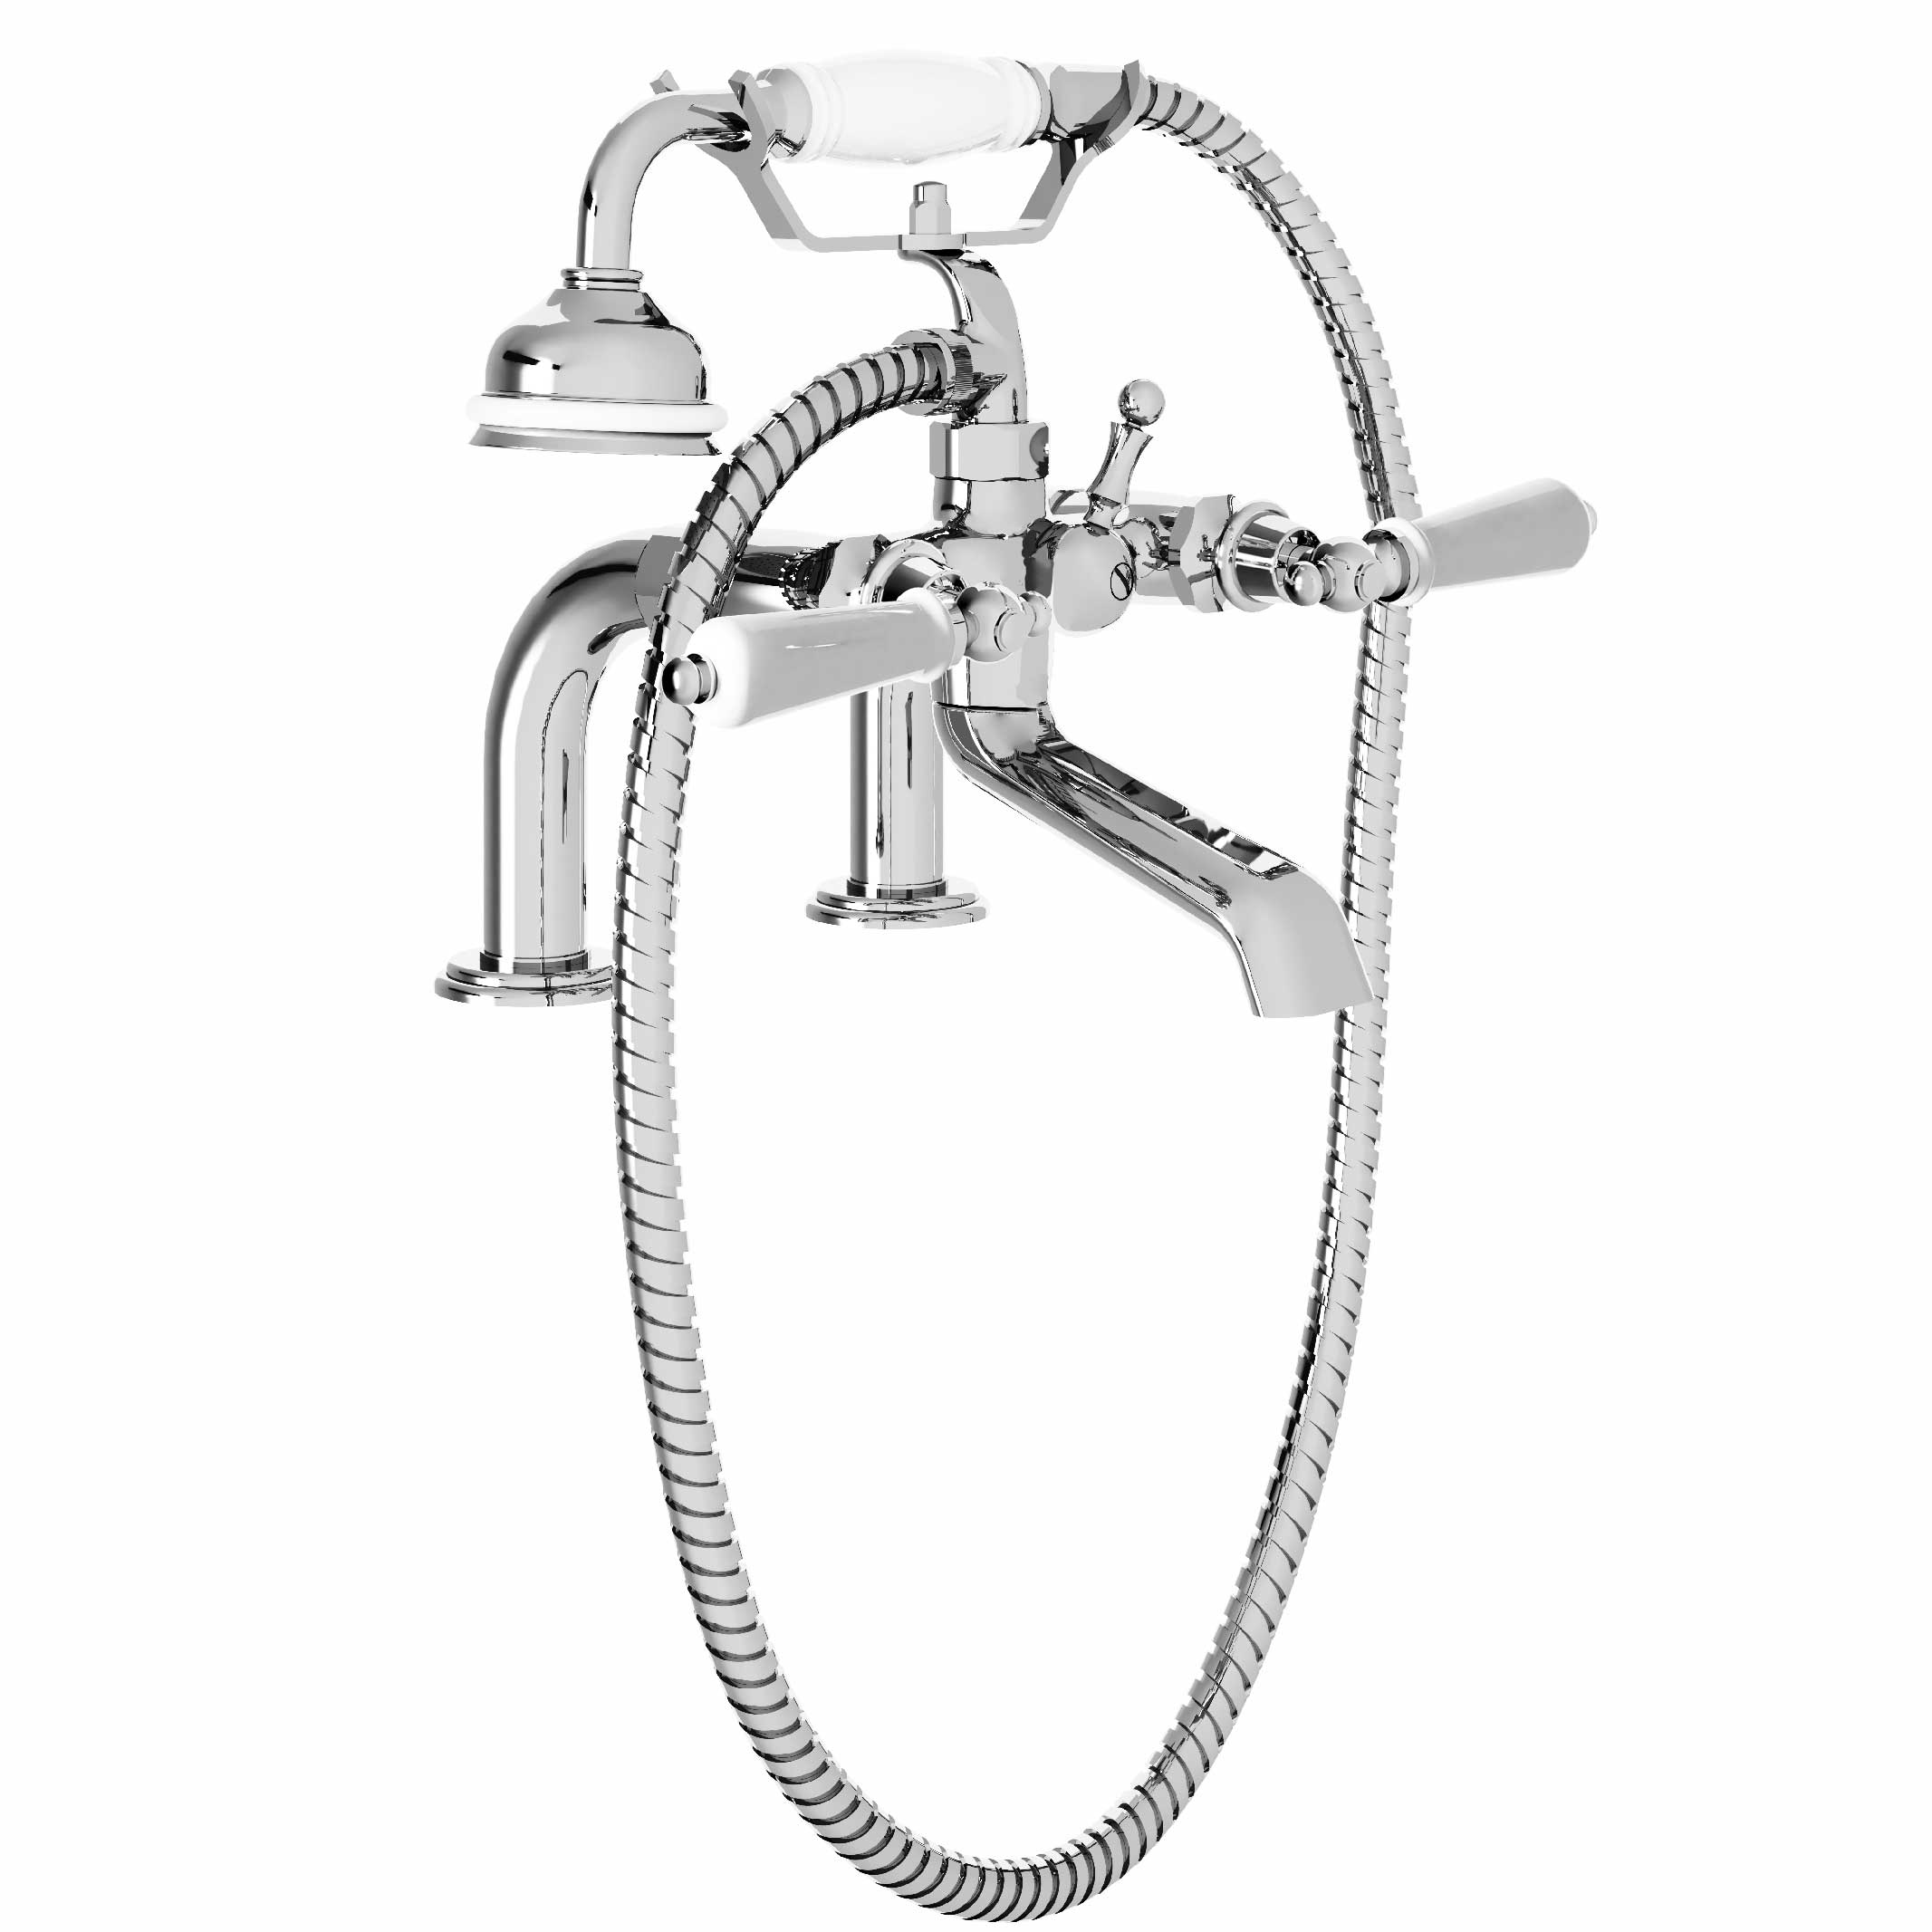 M32-3306 Rim mounted bath and shower mixer